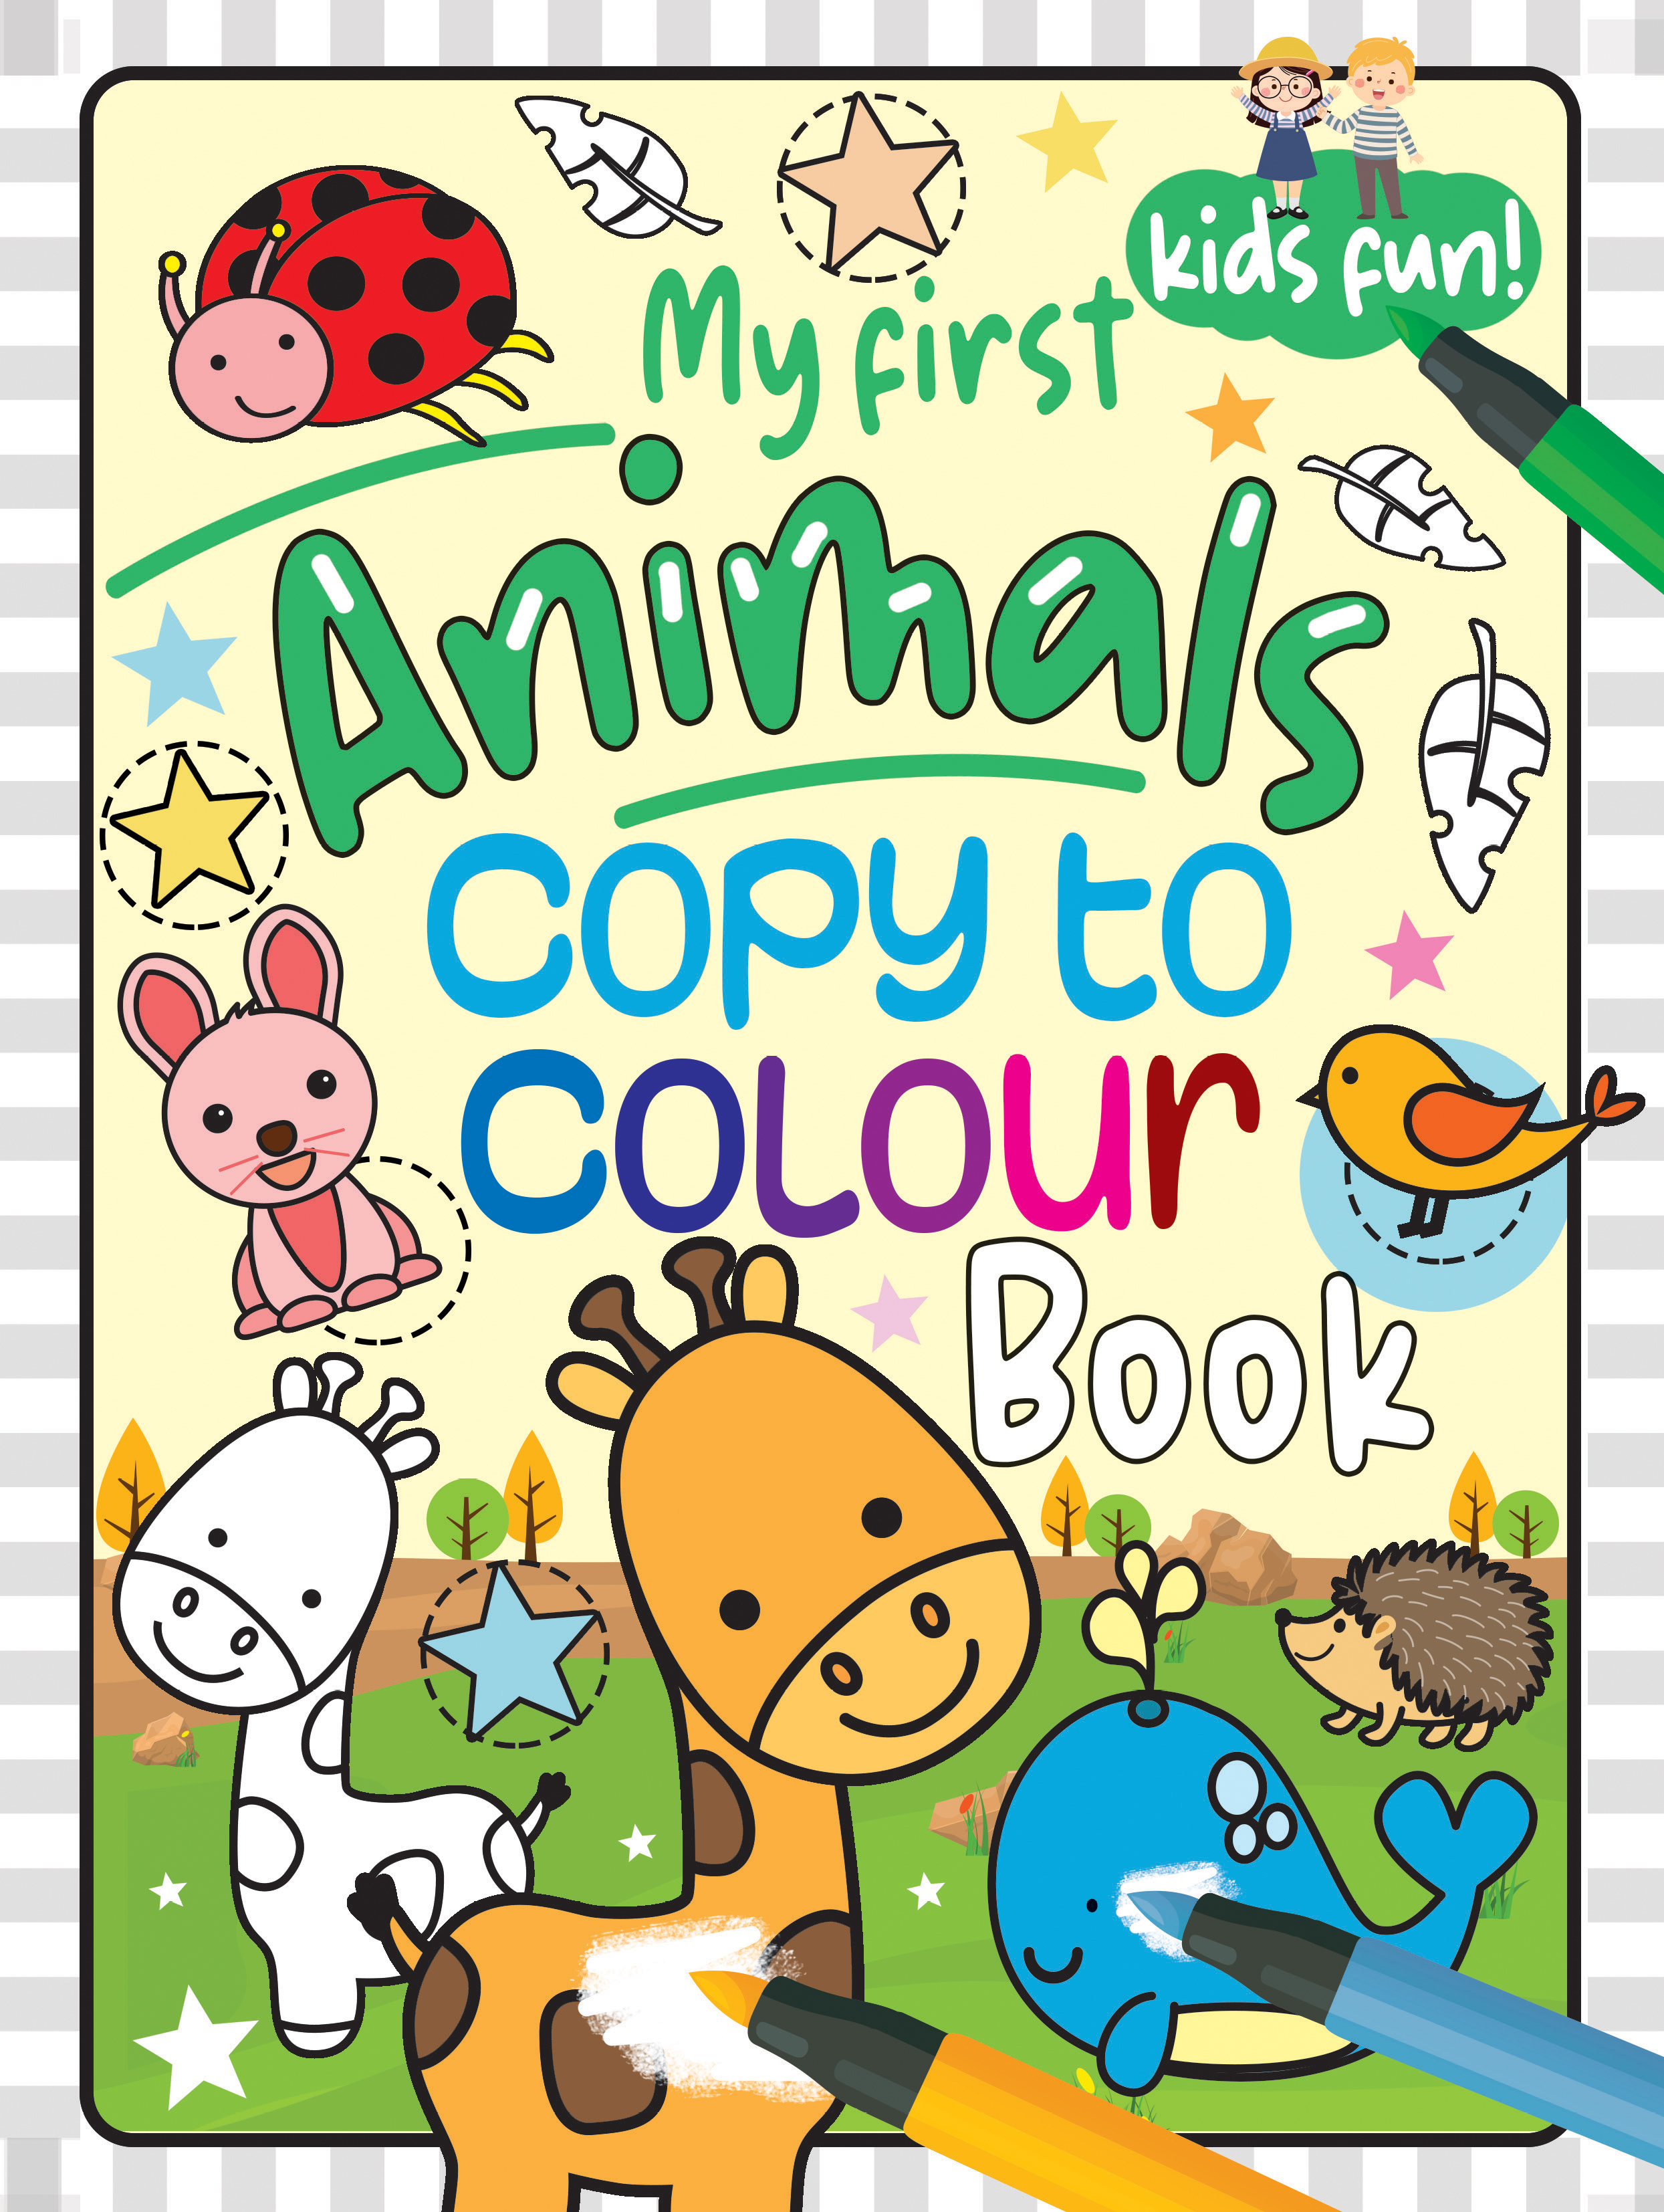 Easy Colour - Cool Copy Colouring Animals